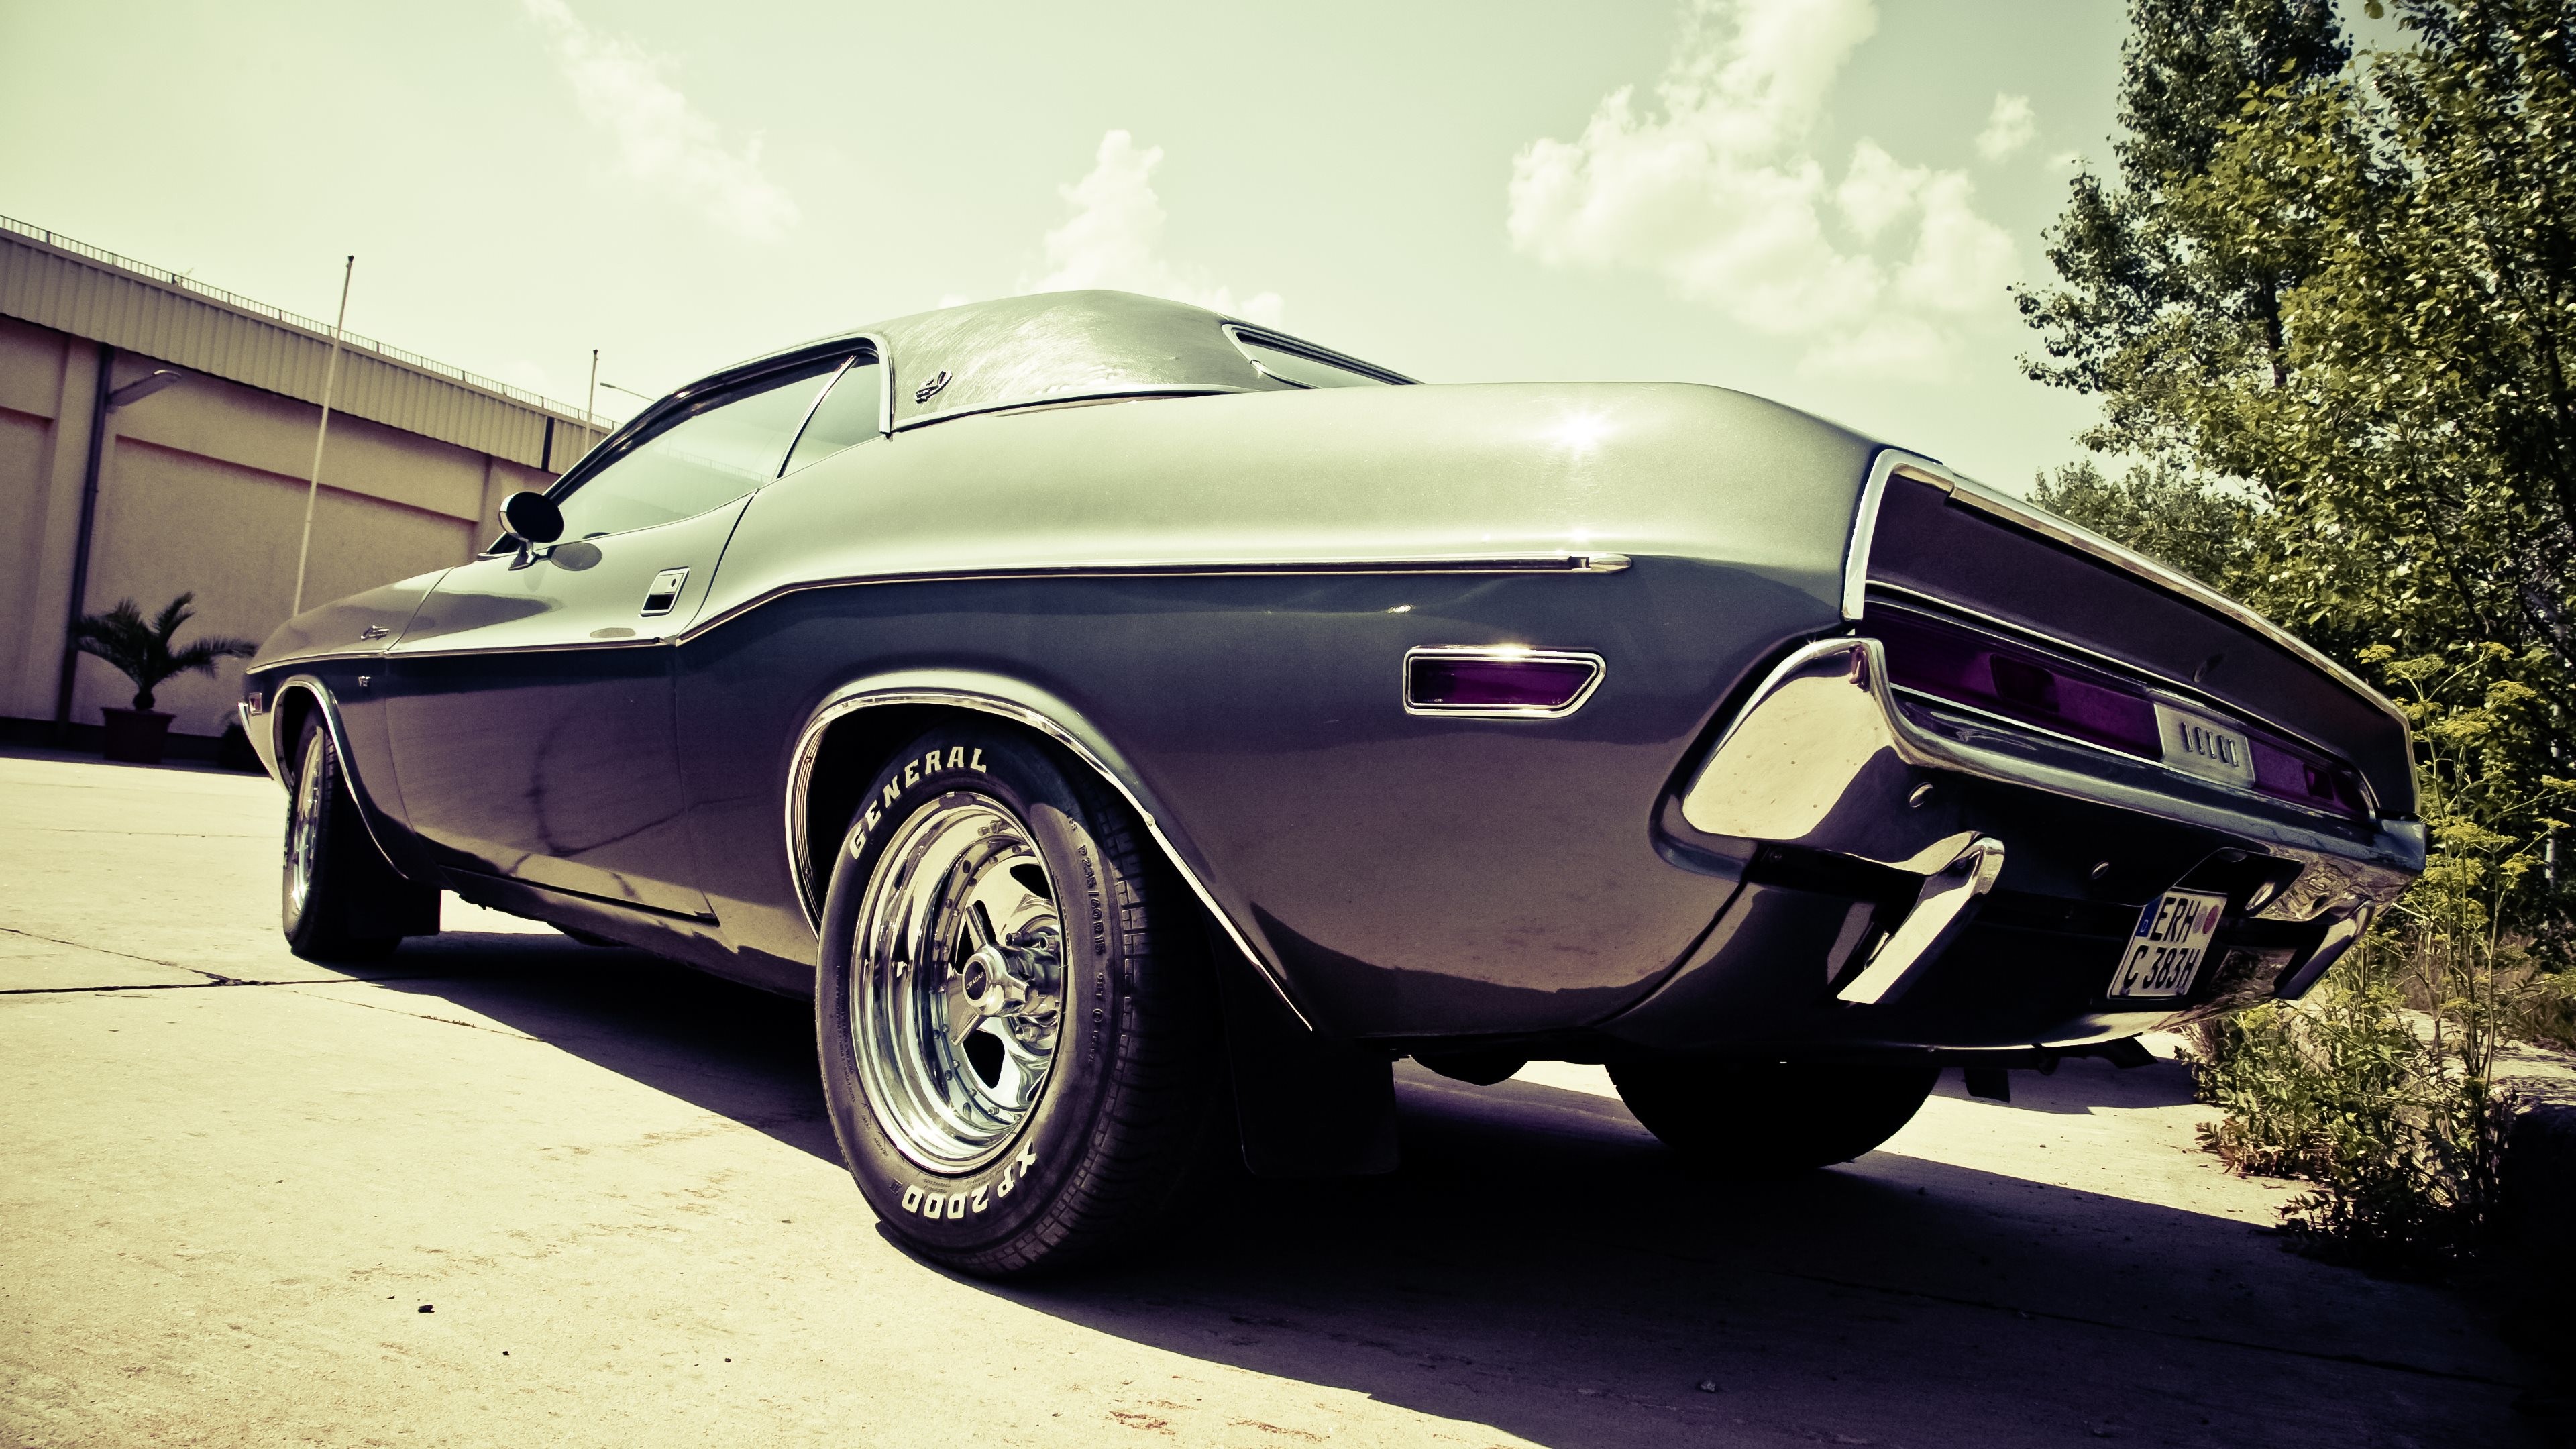 3840x2160 Old Timer Muscle Car Hd Wallpapers 4k Macbook And Desktop